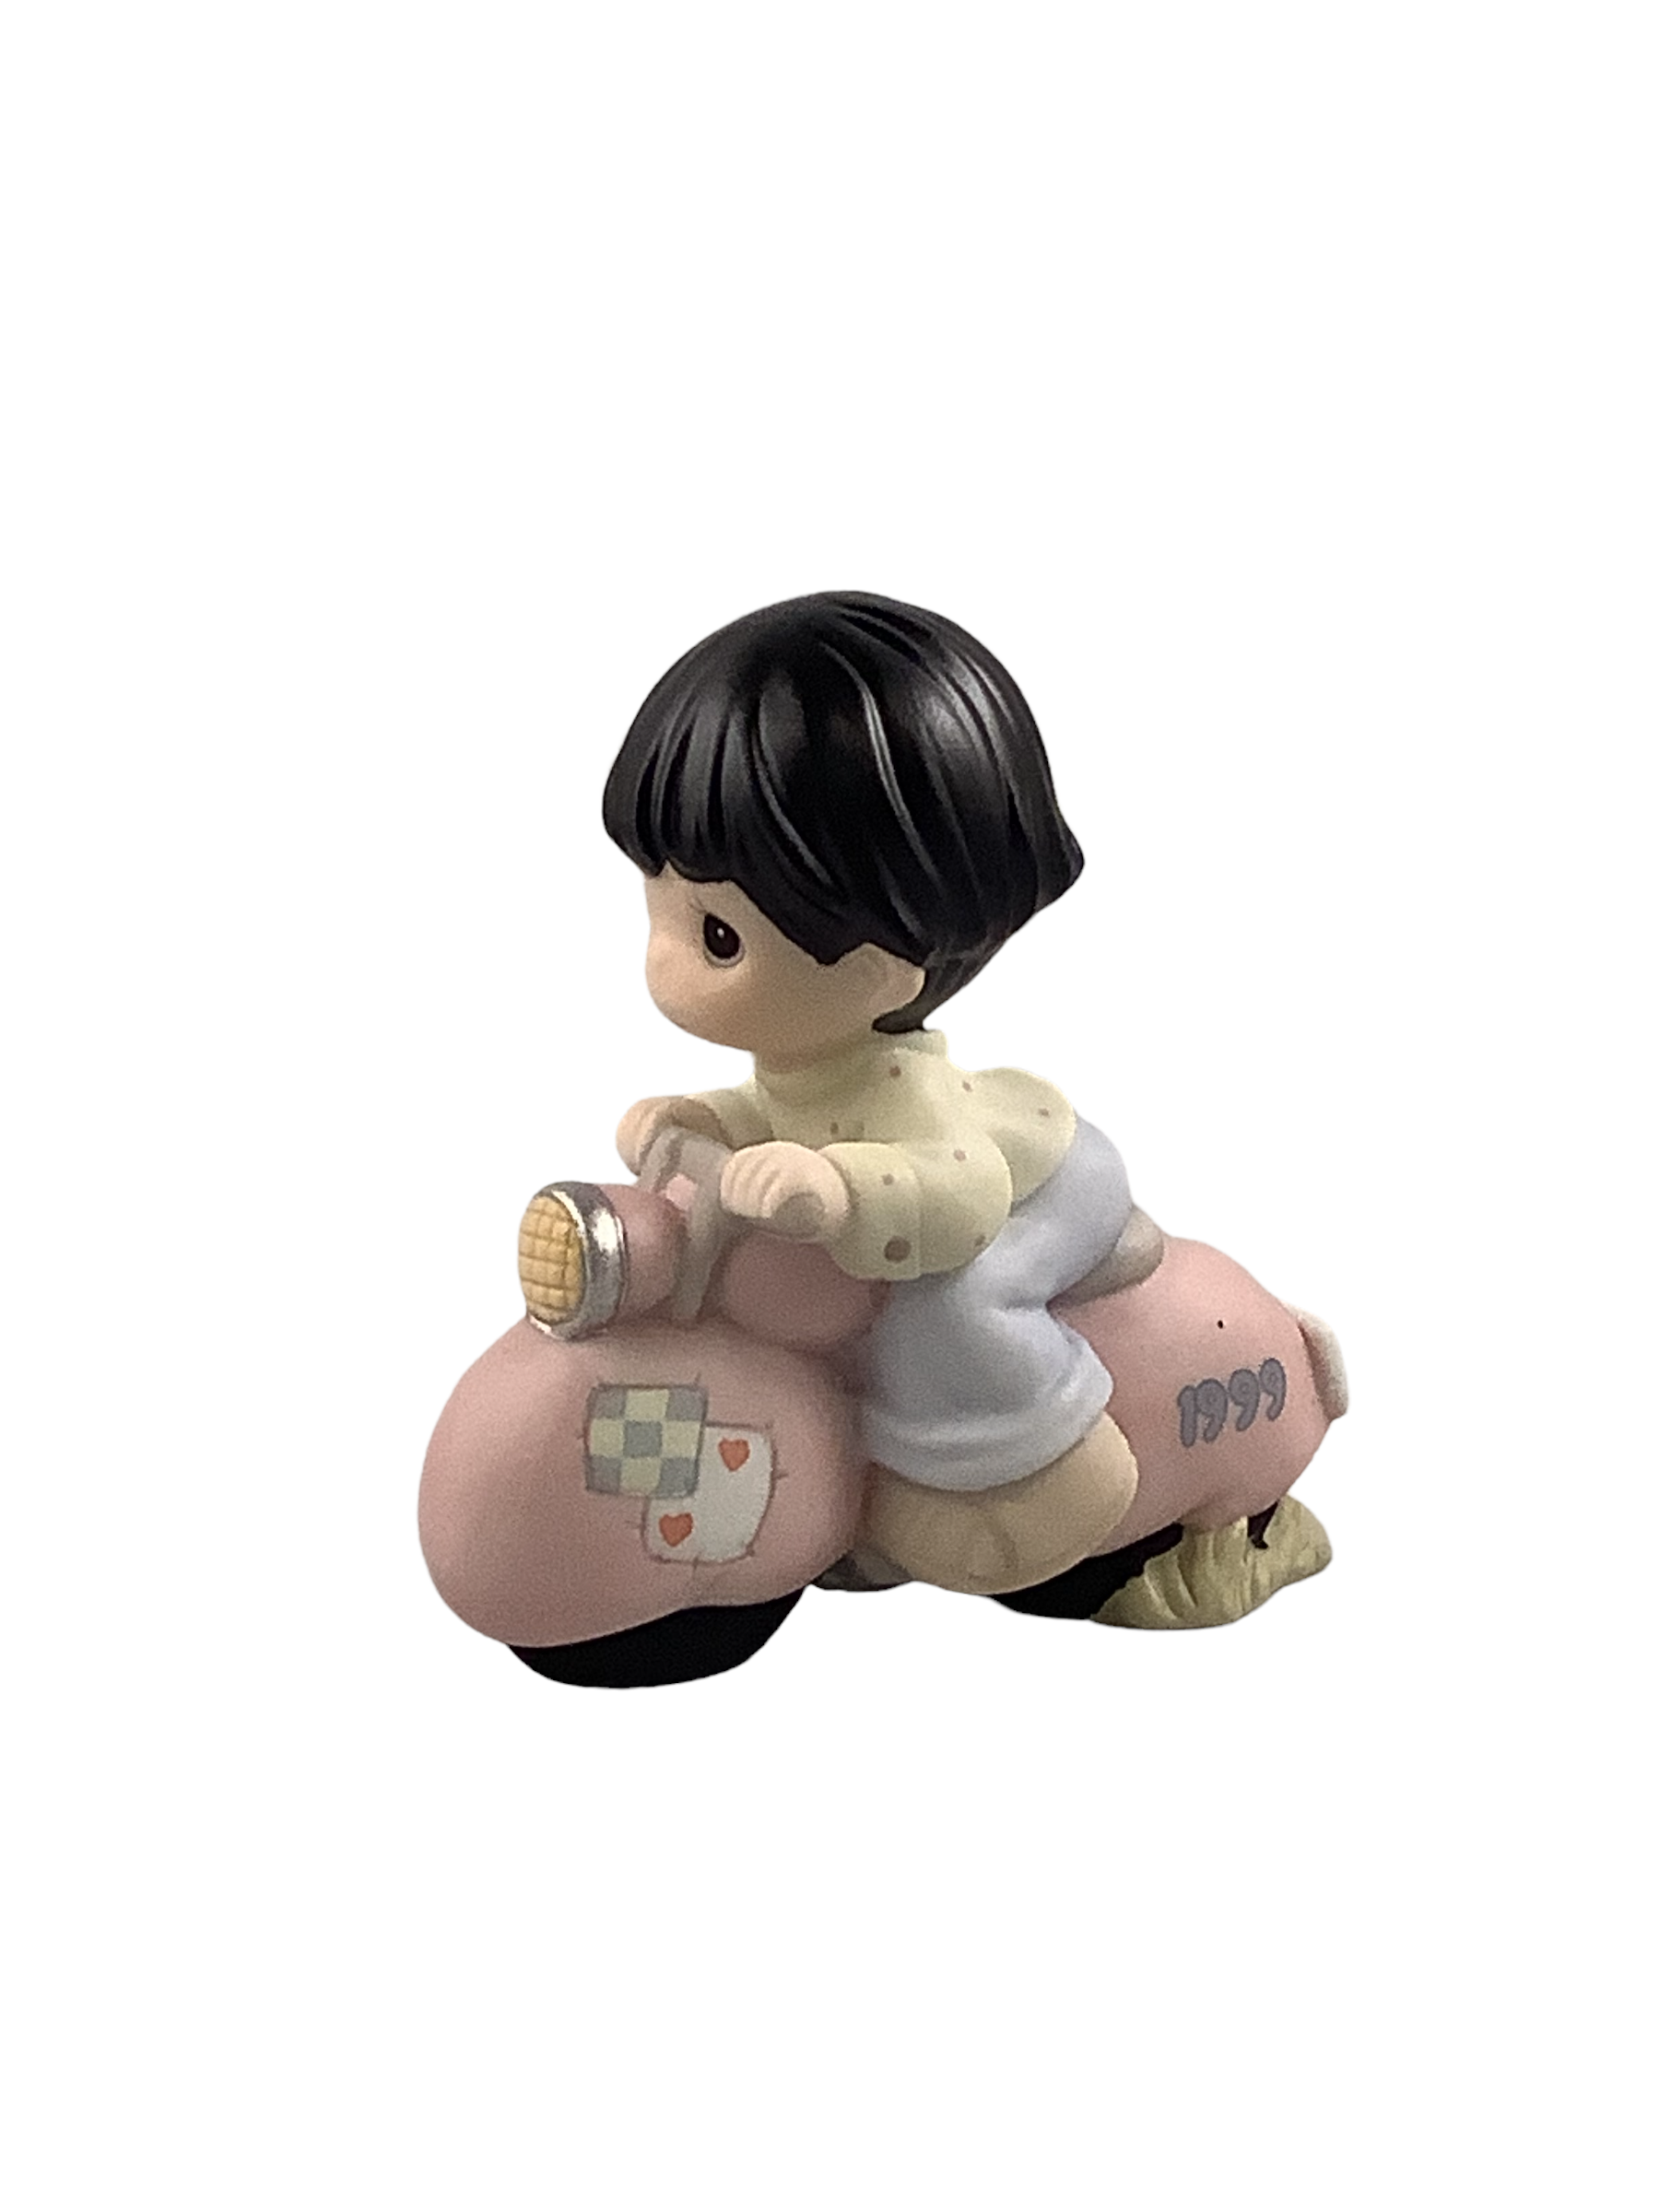 Scootin’ Your Way To A Perfect Day - Precious Moment Figurine 